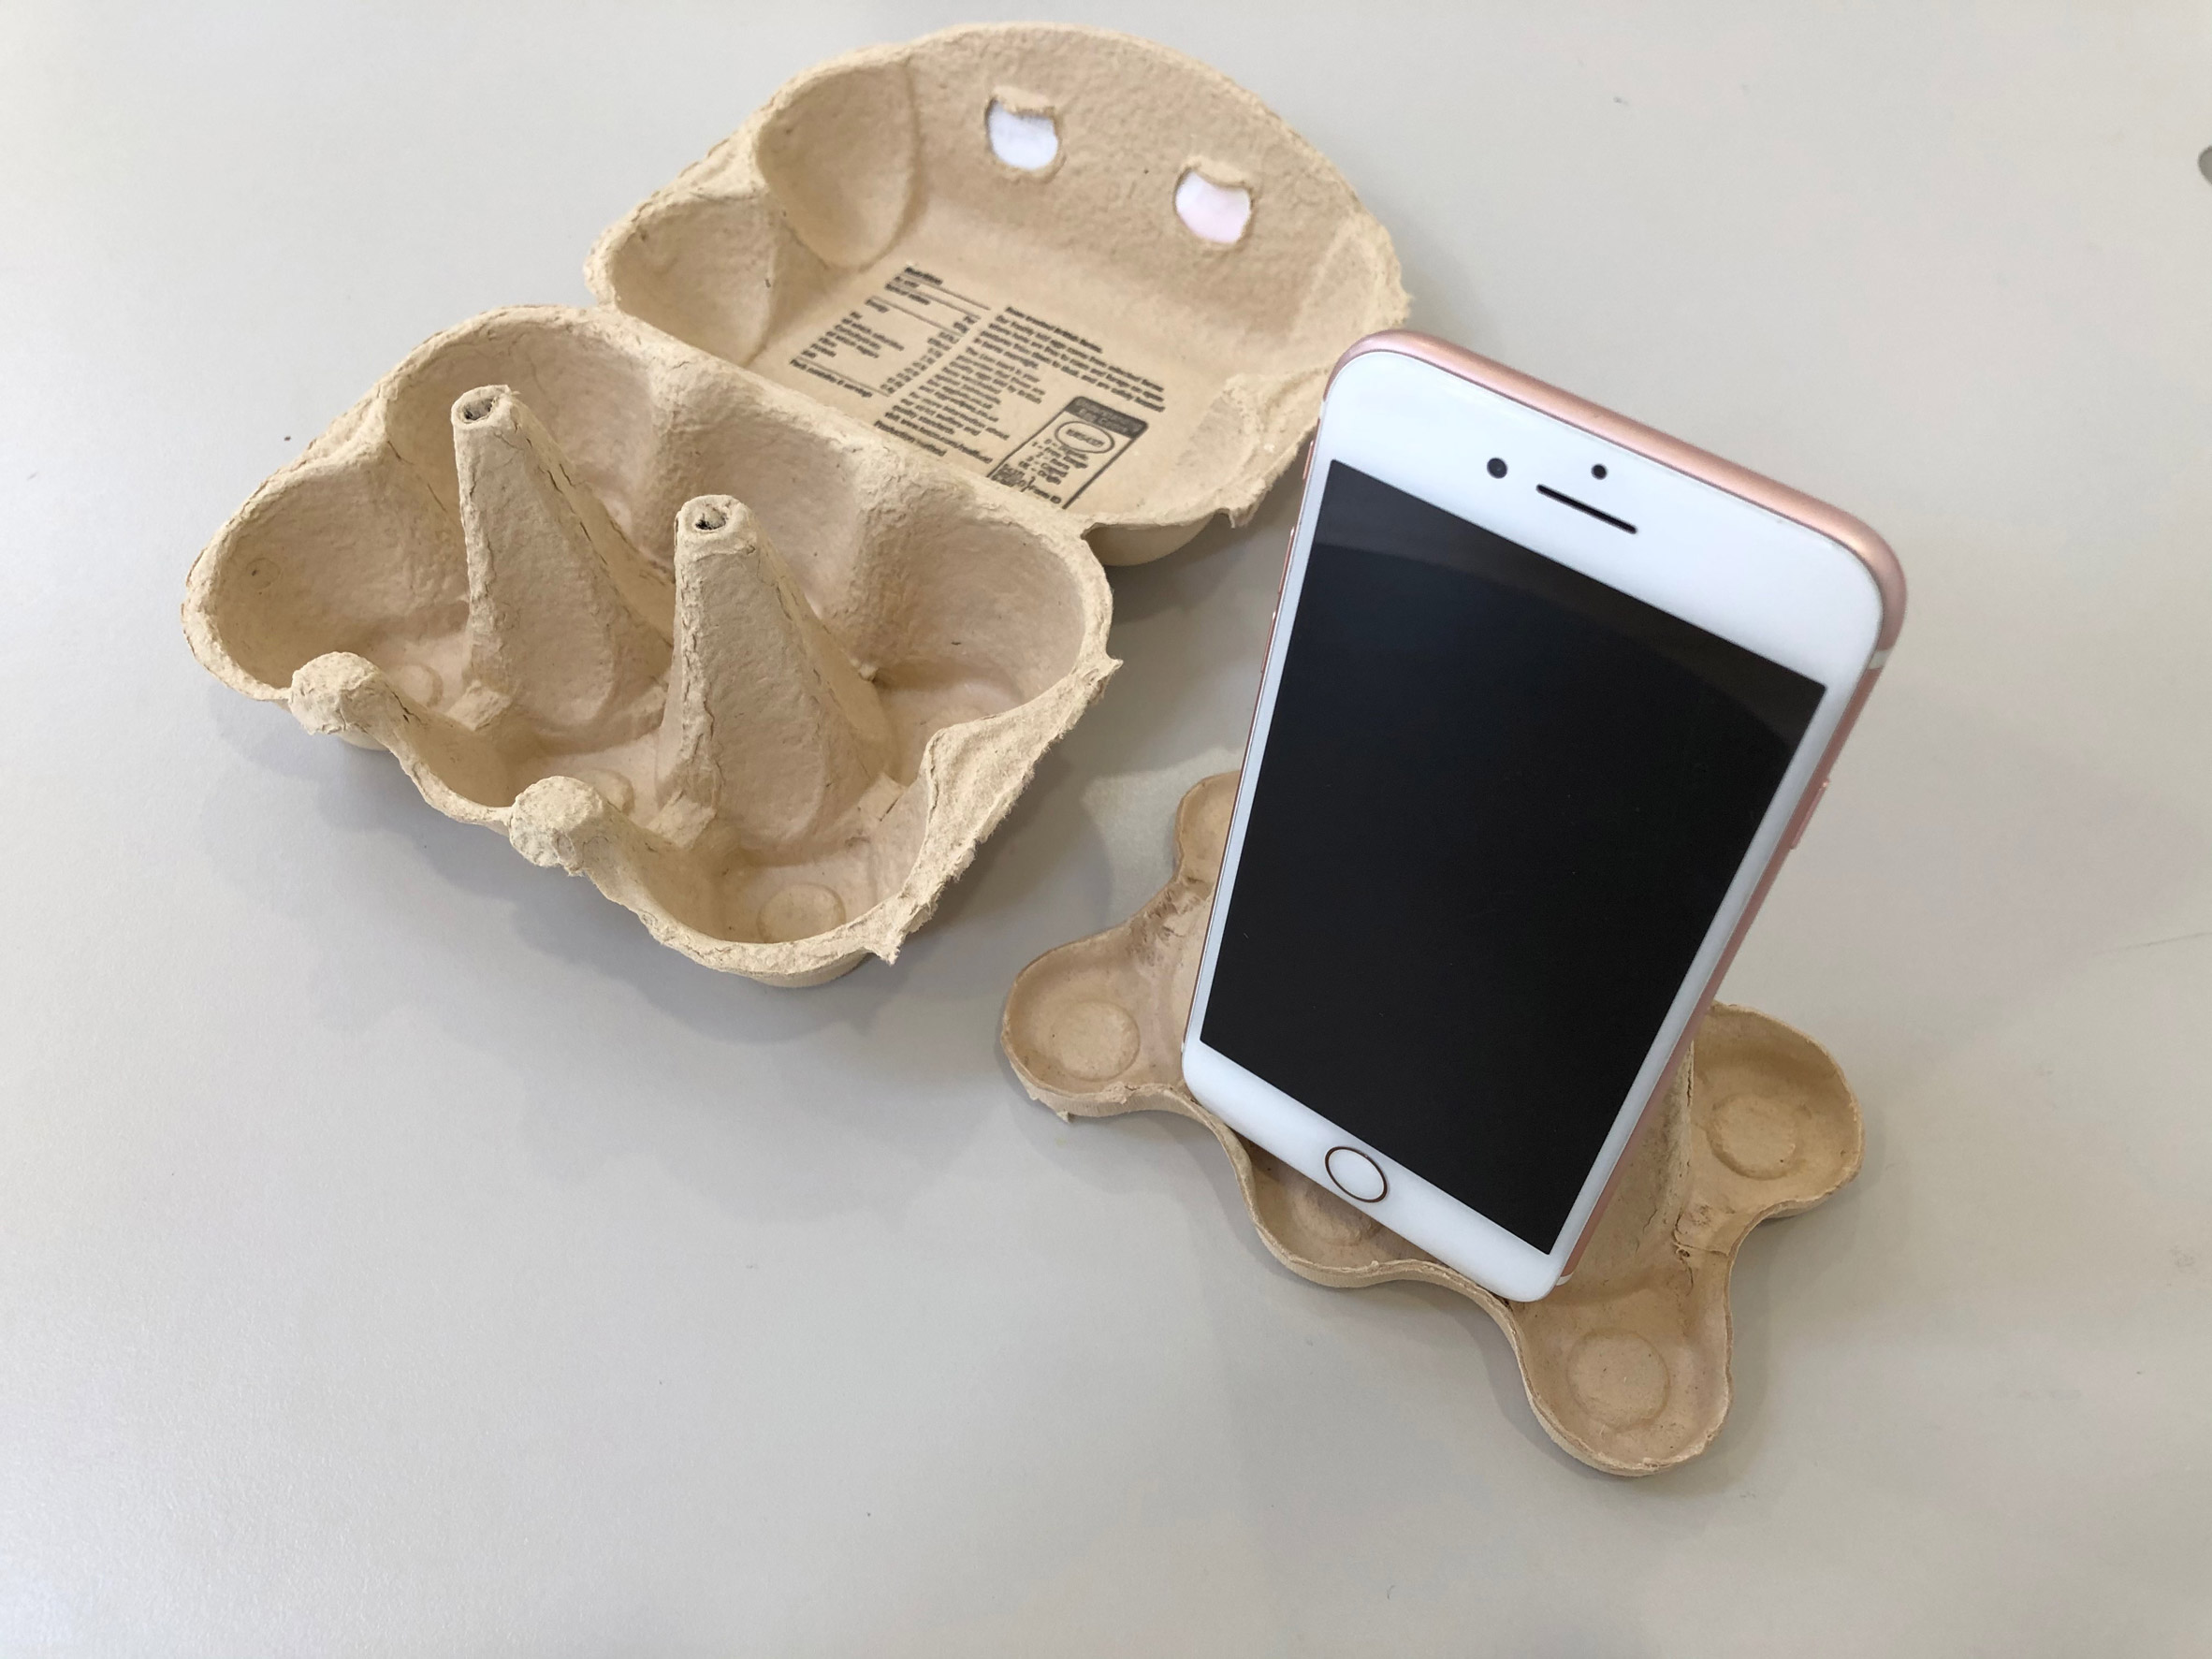 Paul Priestman makes DIY smartphone stand from an egg box